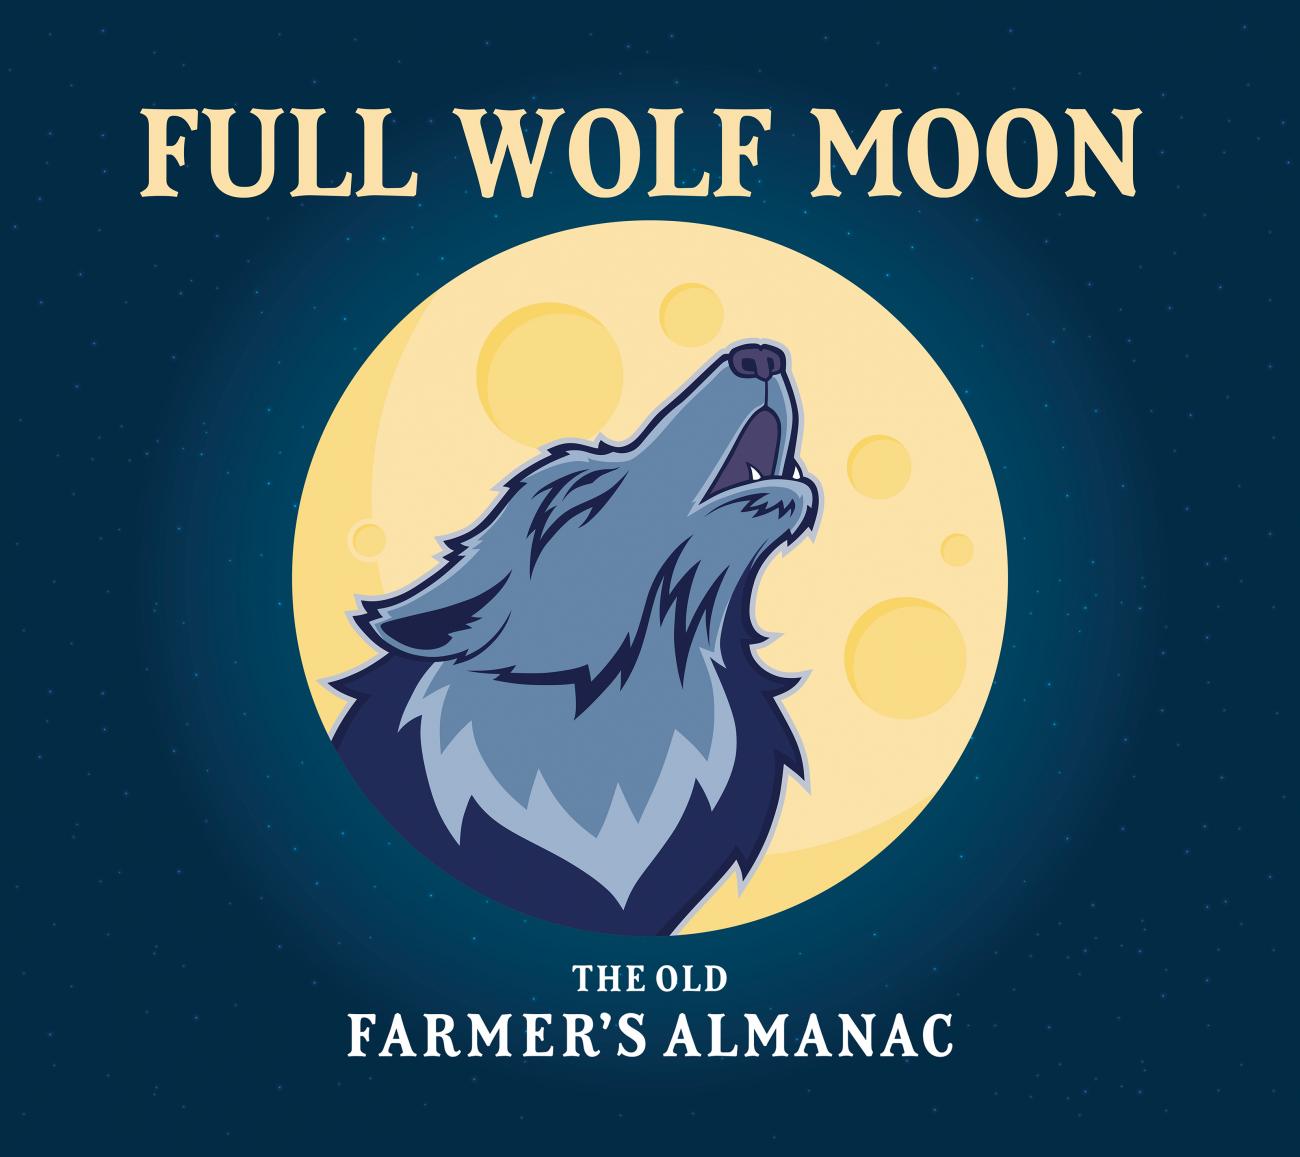 The Full Woof Moon: Moonshine Time